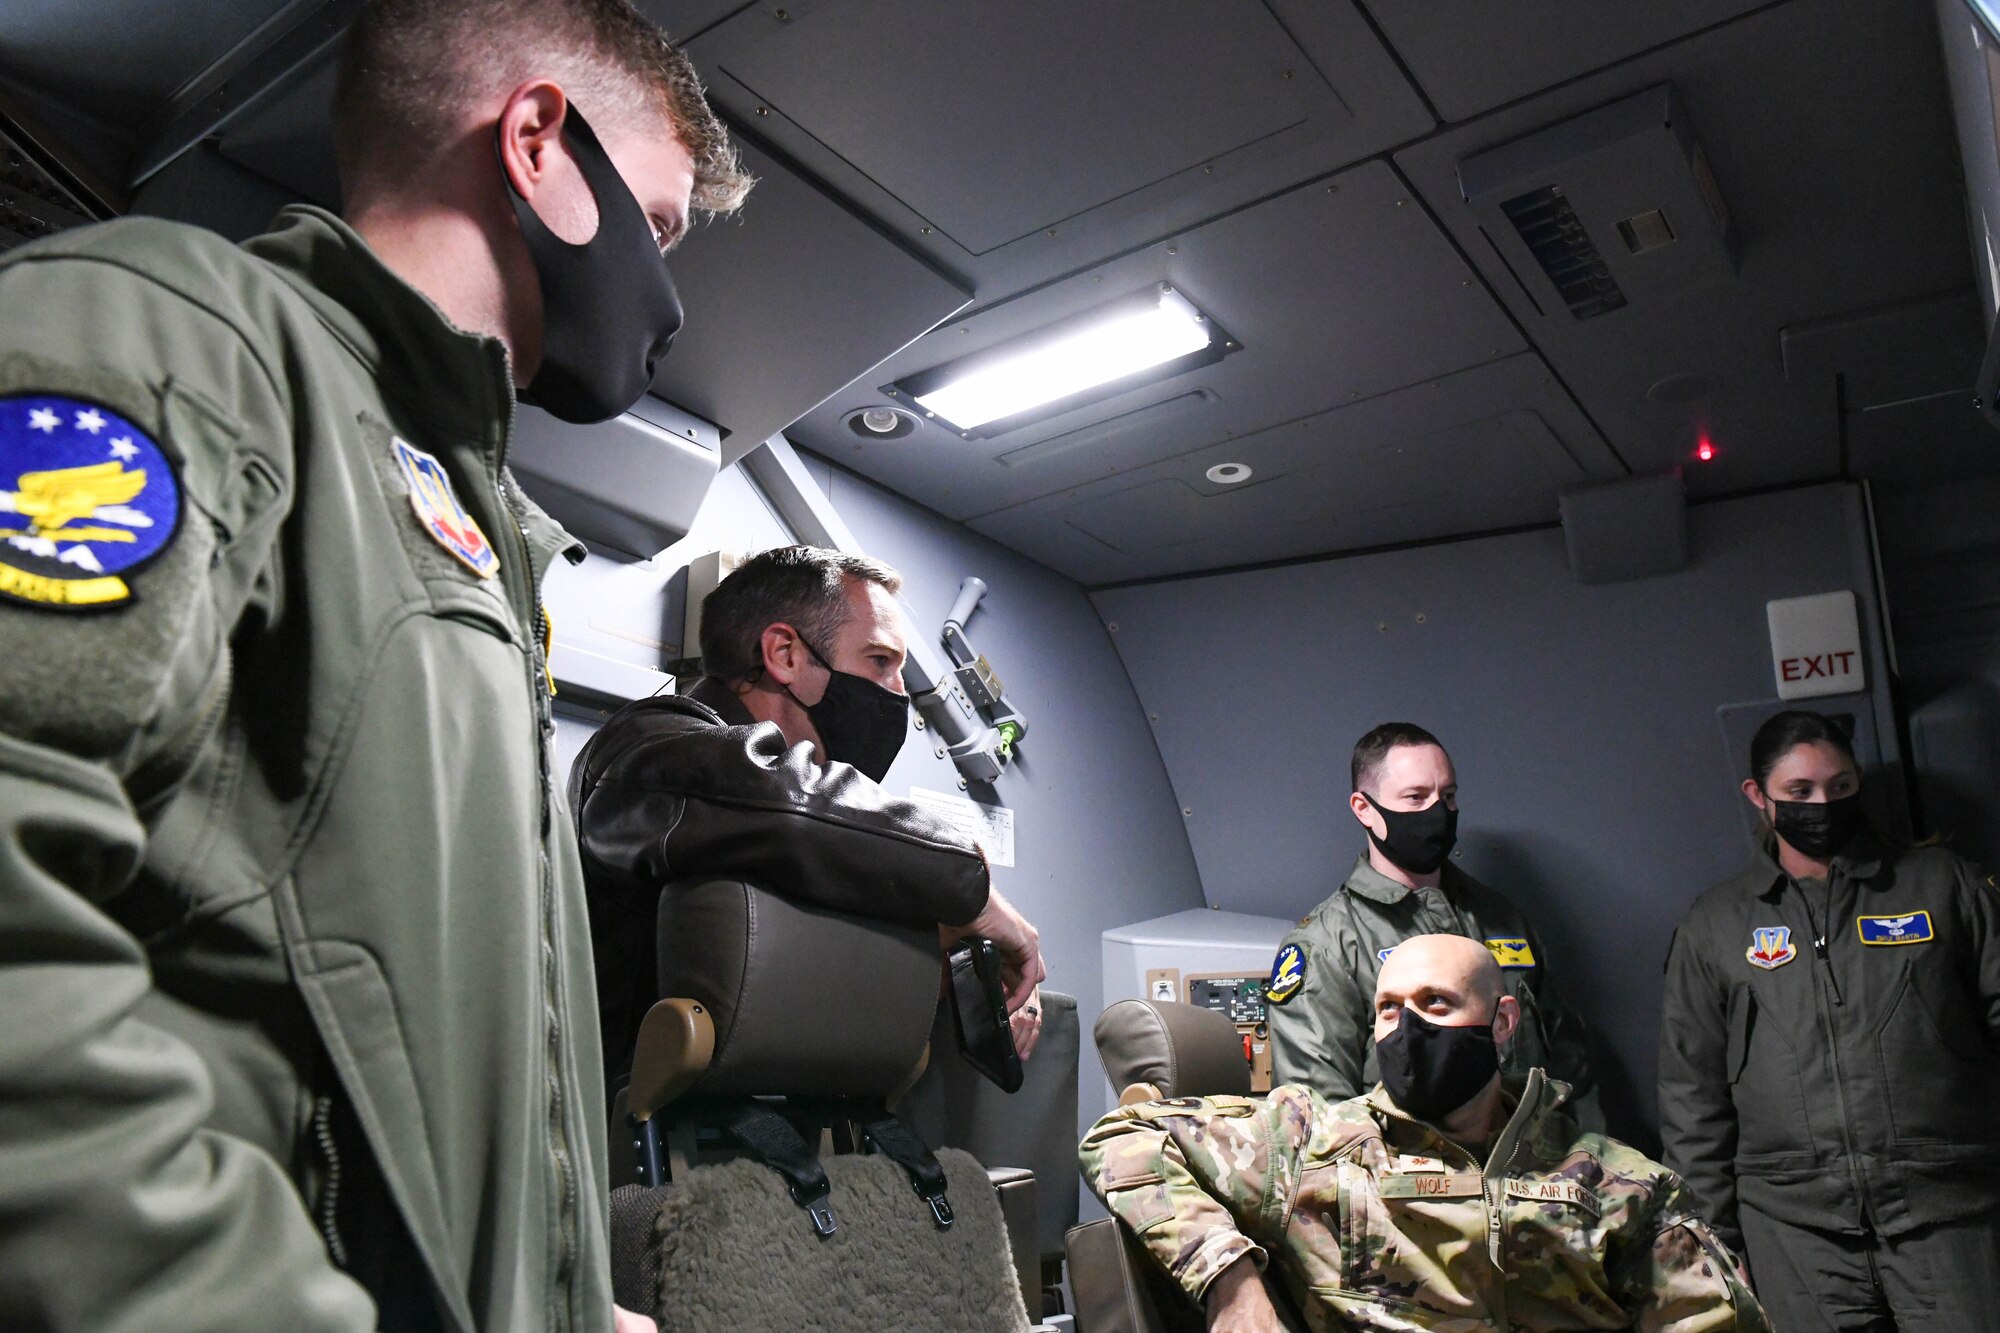 U.S. Air Force Maj. Maximilian Robidoux, 56th Air Refueling Squadron (ARS) assistant director of operations, discusses the Tactical Situation Awareness System (TSAS) display with members of the 552nd Operations Group (OG) on Altus Air Force Base, Oklahoma, Nov. 2, 2021. The TSAS is similar to the systems used on the E-3 Sentry Airborne Warning and Control Systems aircraft, so this was an opportunity for the 552nd OG, from Tinker Air Force Base, Oklahoma, to educate the 56th ARS on these systems. (U.S. Air Force photo by Airman 1st Class Trenton Jancze)